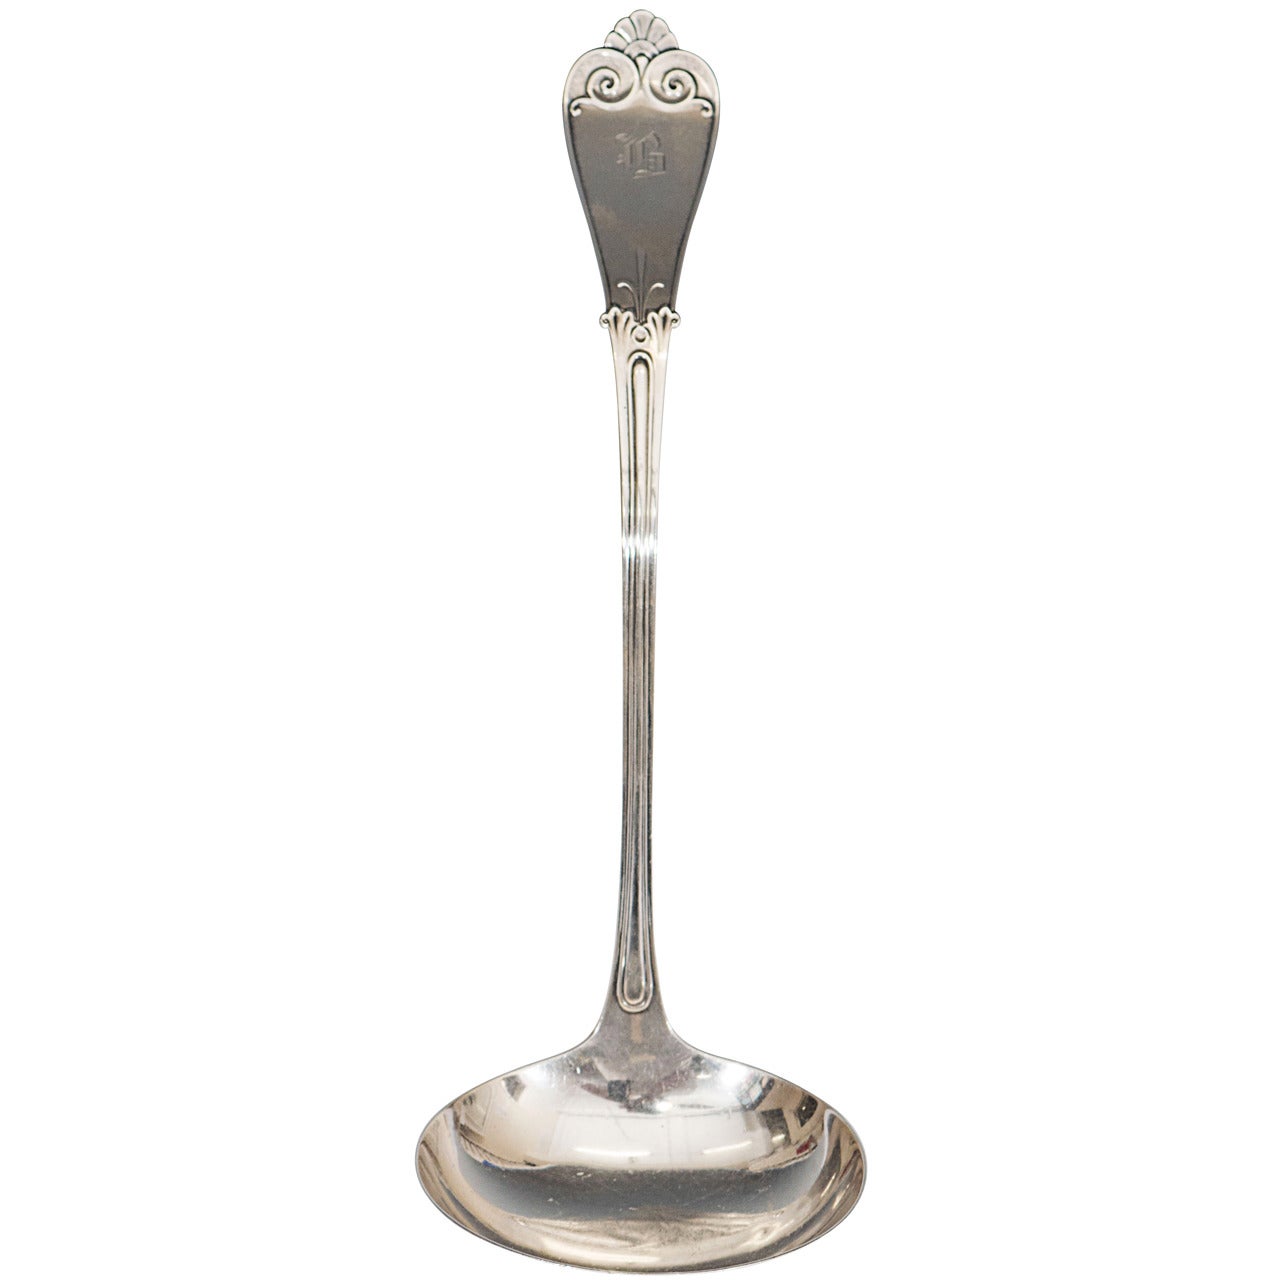 Antique Tiffany & Co. 1869 Beekman Pattern Sterling Silver Ladle For Sale